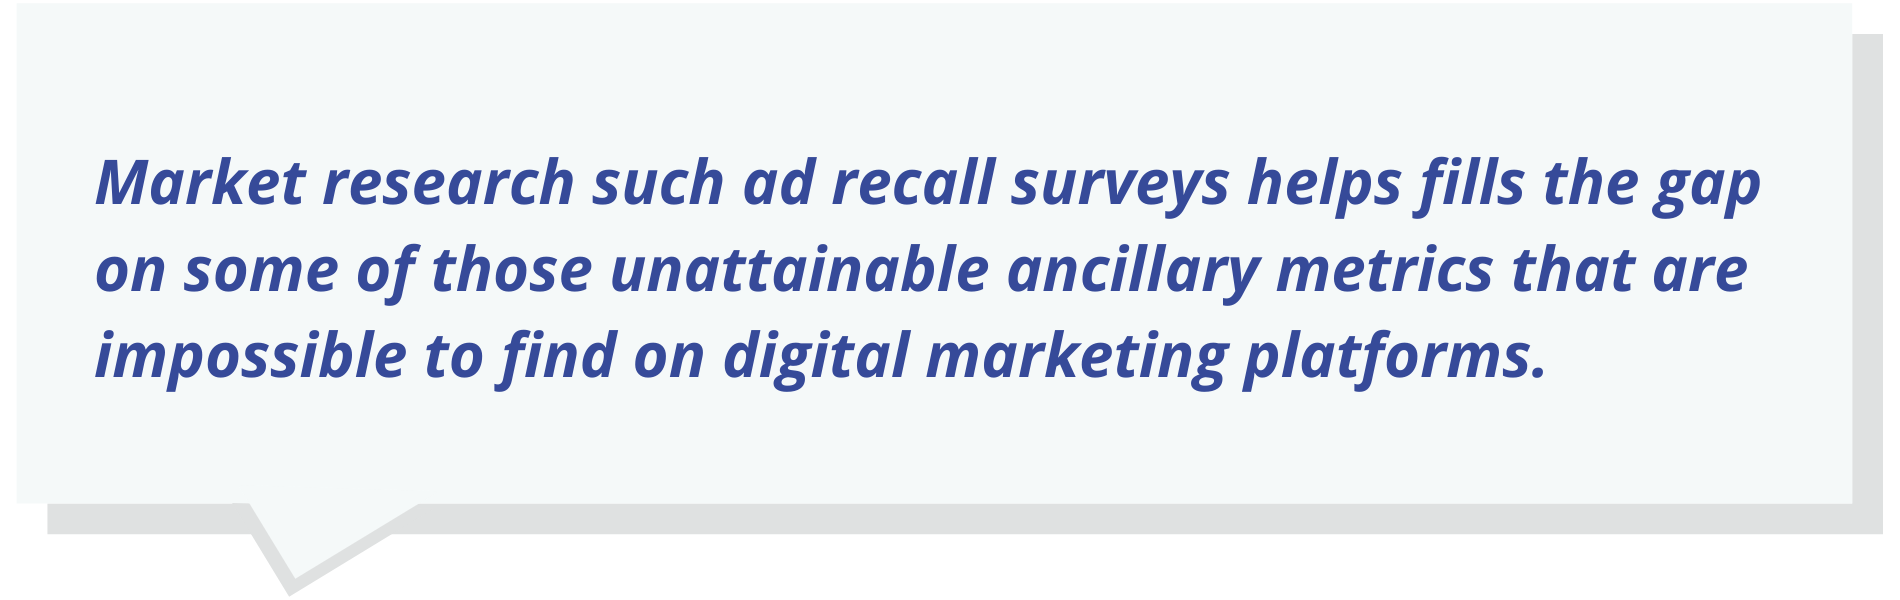 Quote text: Market research such ad recall surveys helps fills the gap on some of those unattainable ancillary metrics that are impossible to find on digital marketing platforms.